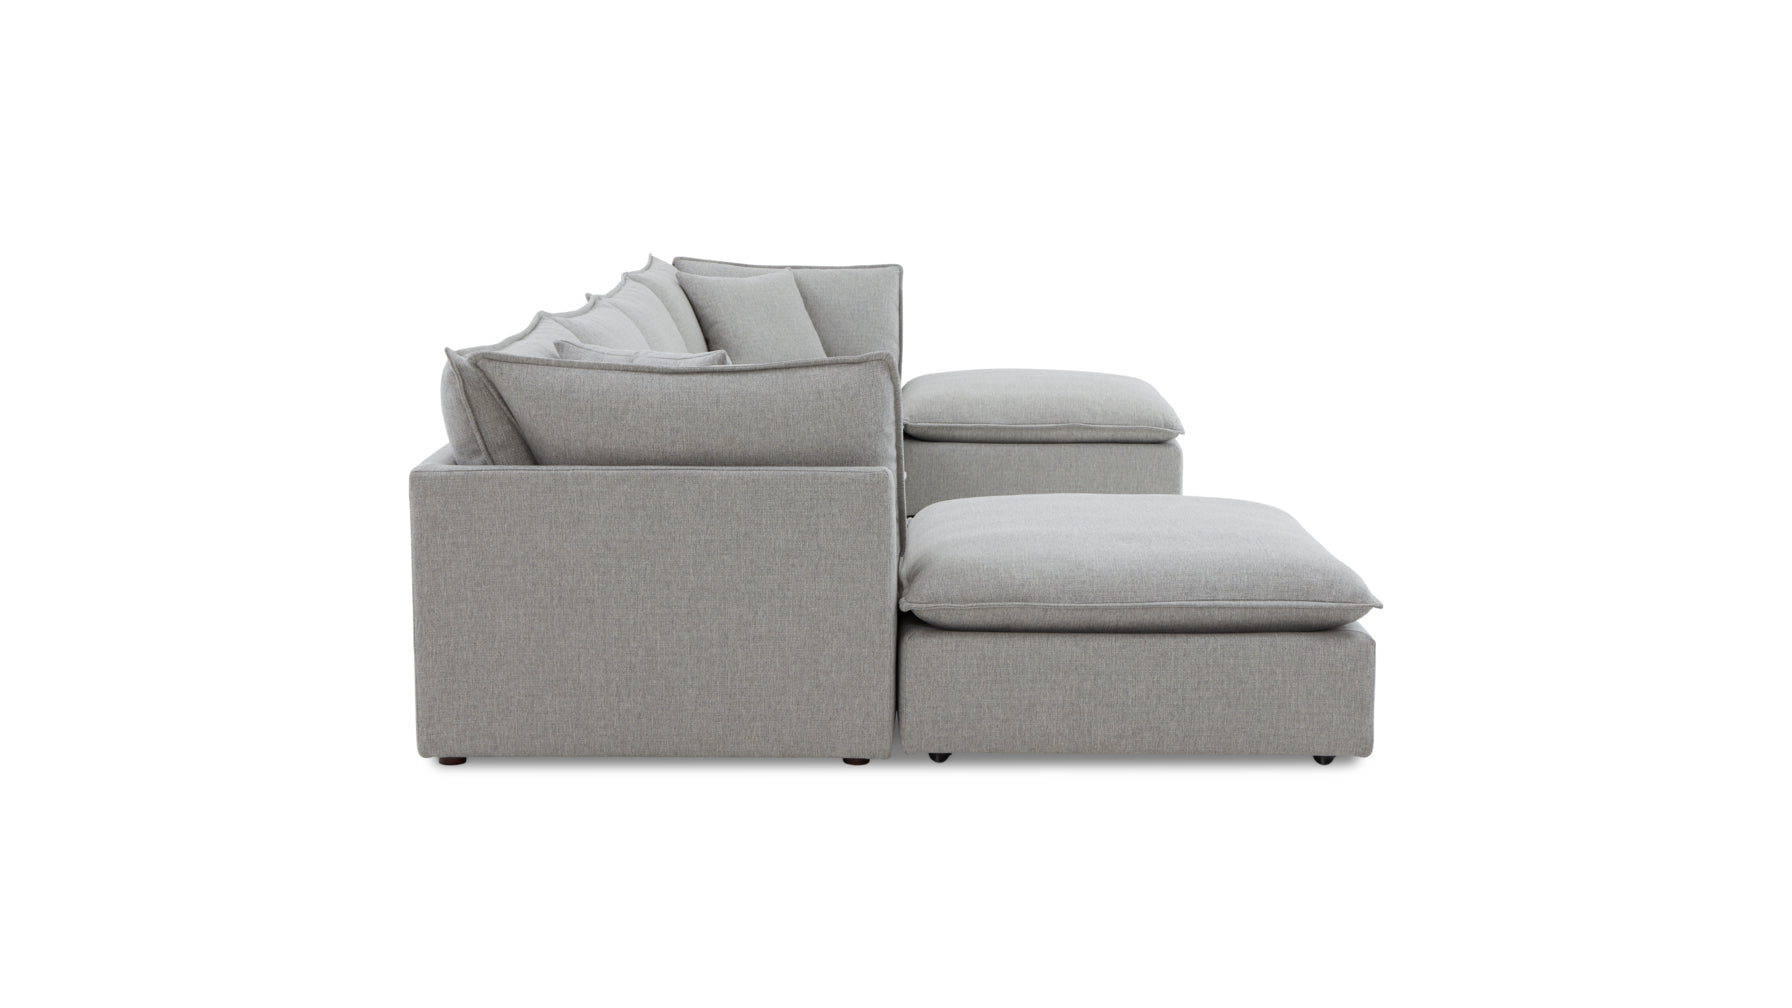 Chill Time 6-Piece Modular U-Shaped Sectional, Heather - Image 3